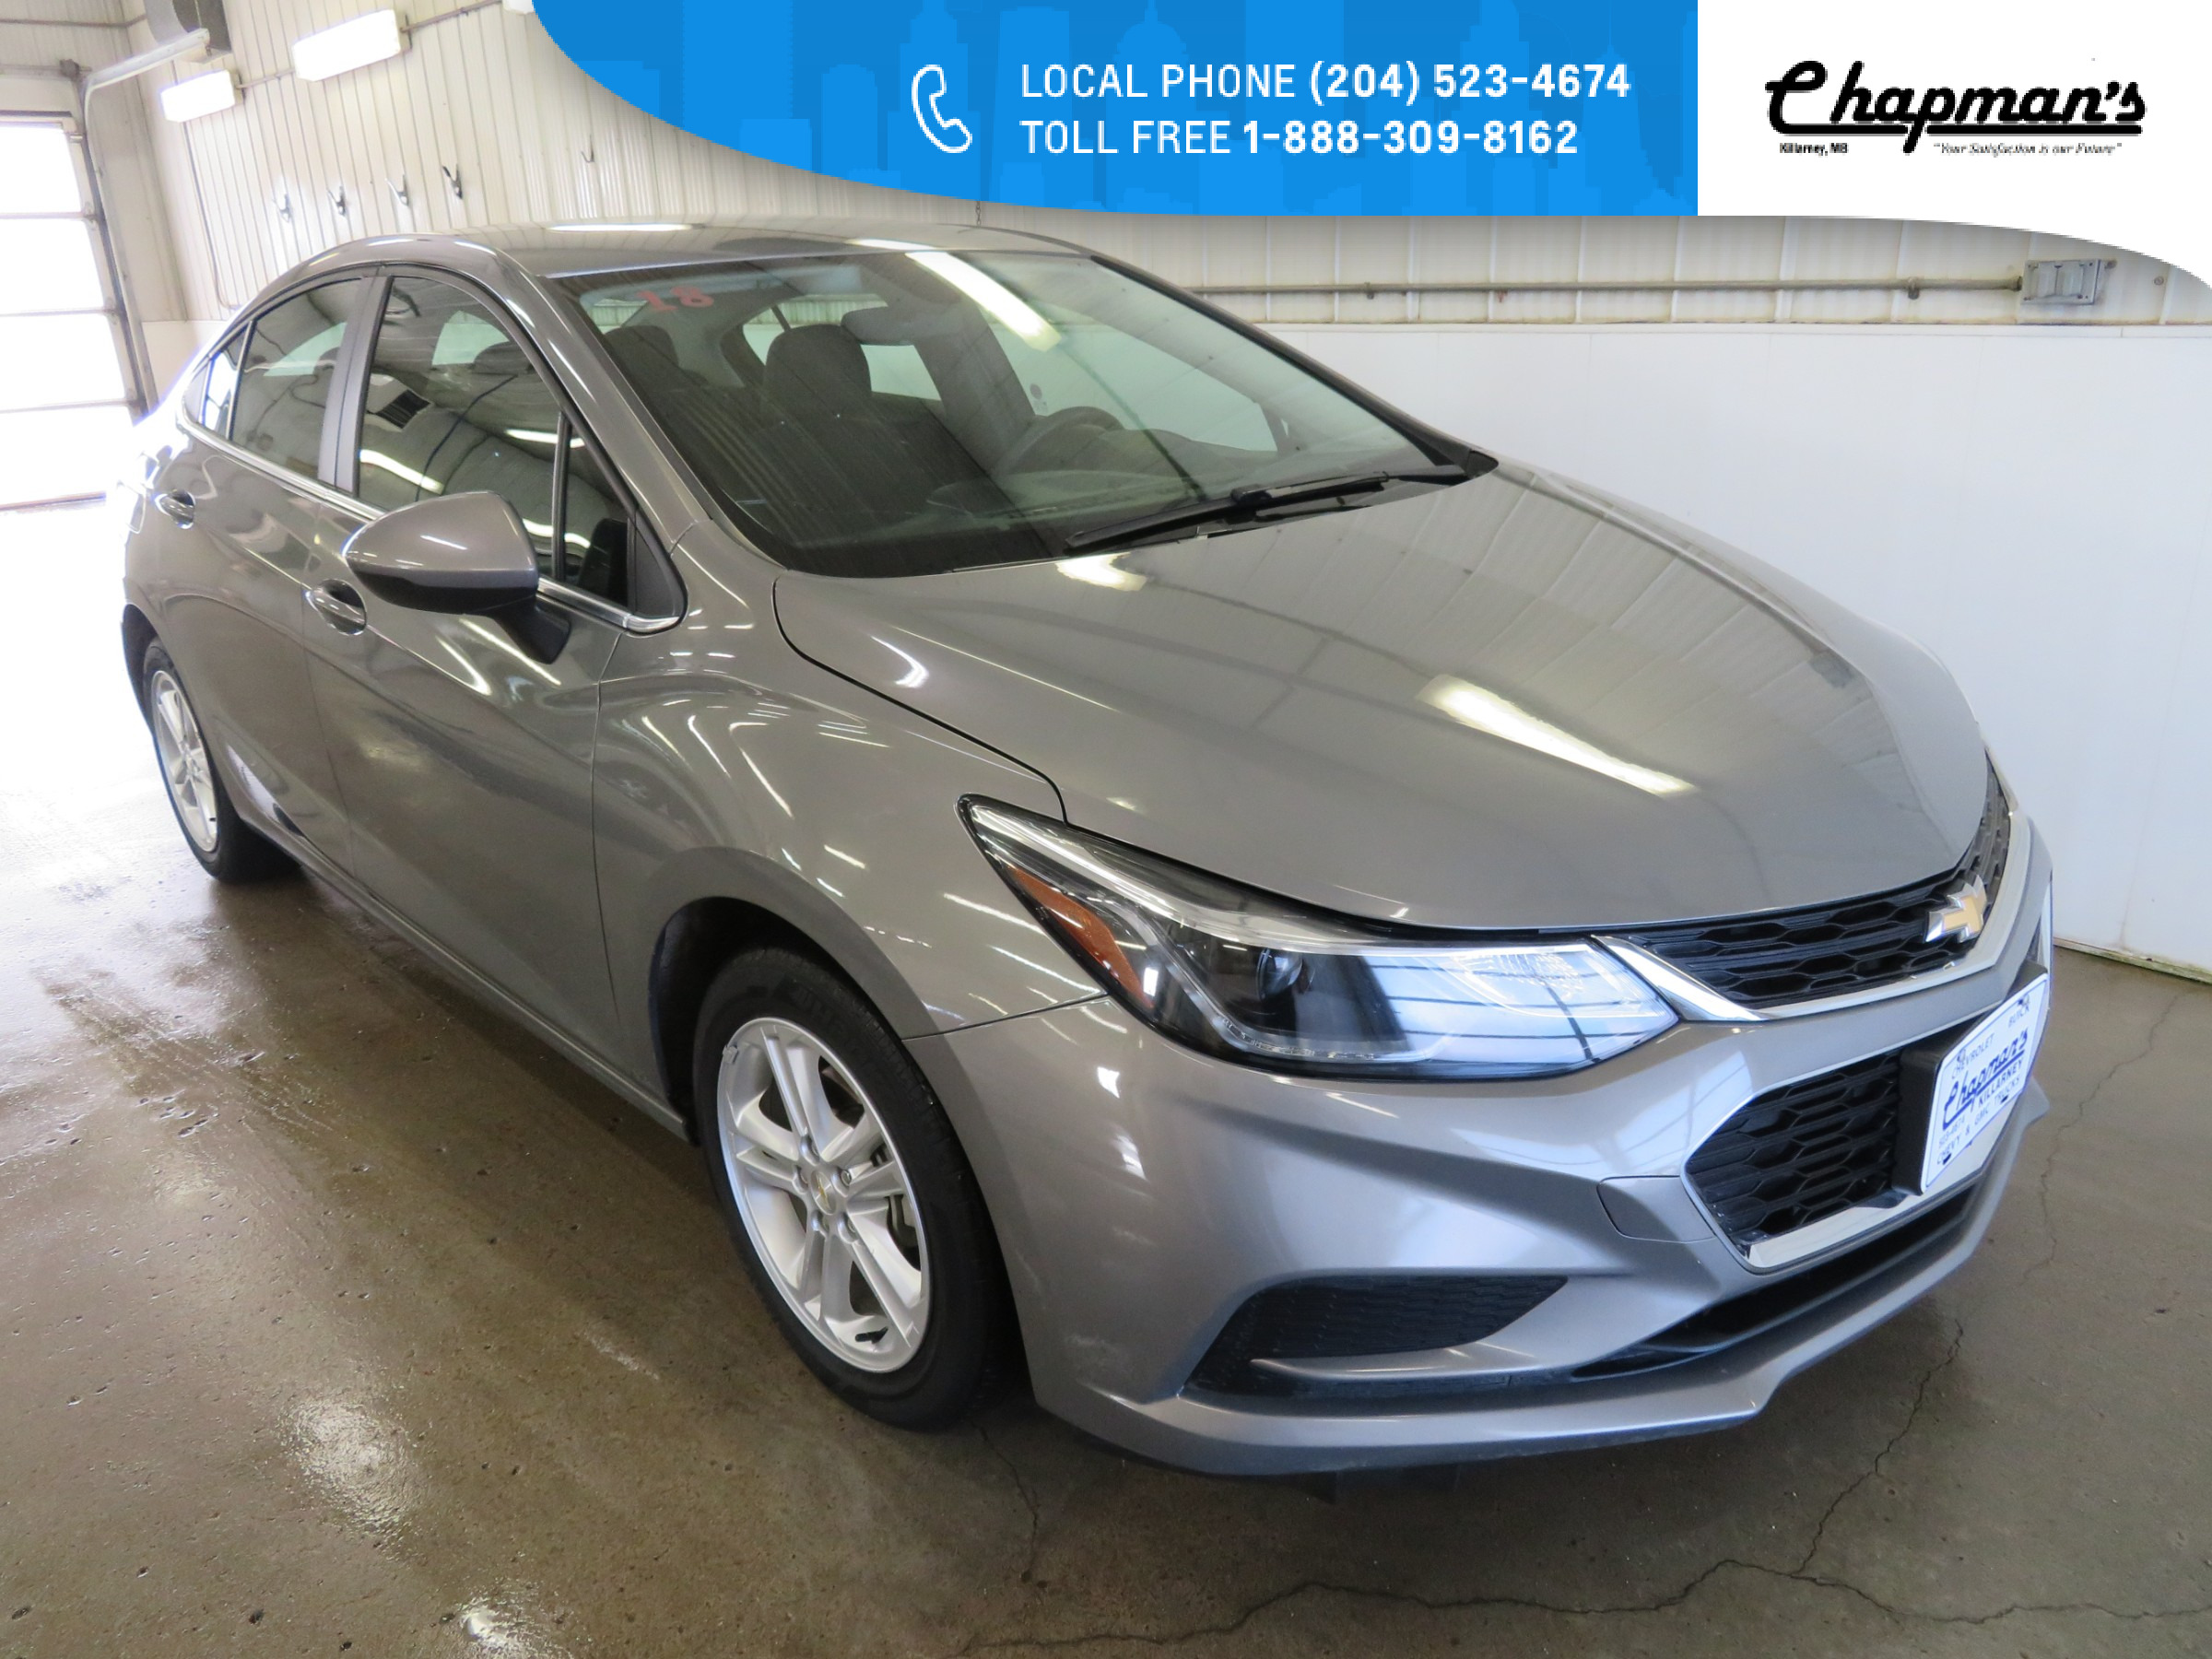 2018 Chevrolet Cruze NEW TIRES, Heated Front Seats, Rear Vision Camera,